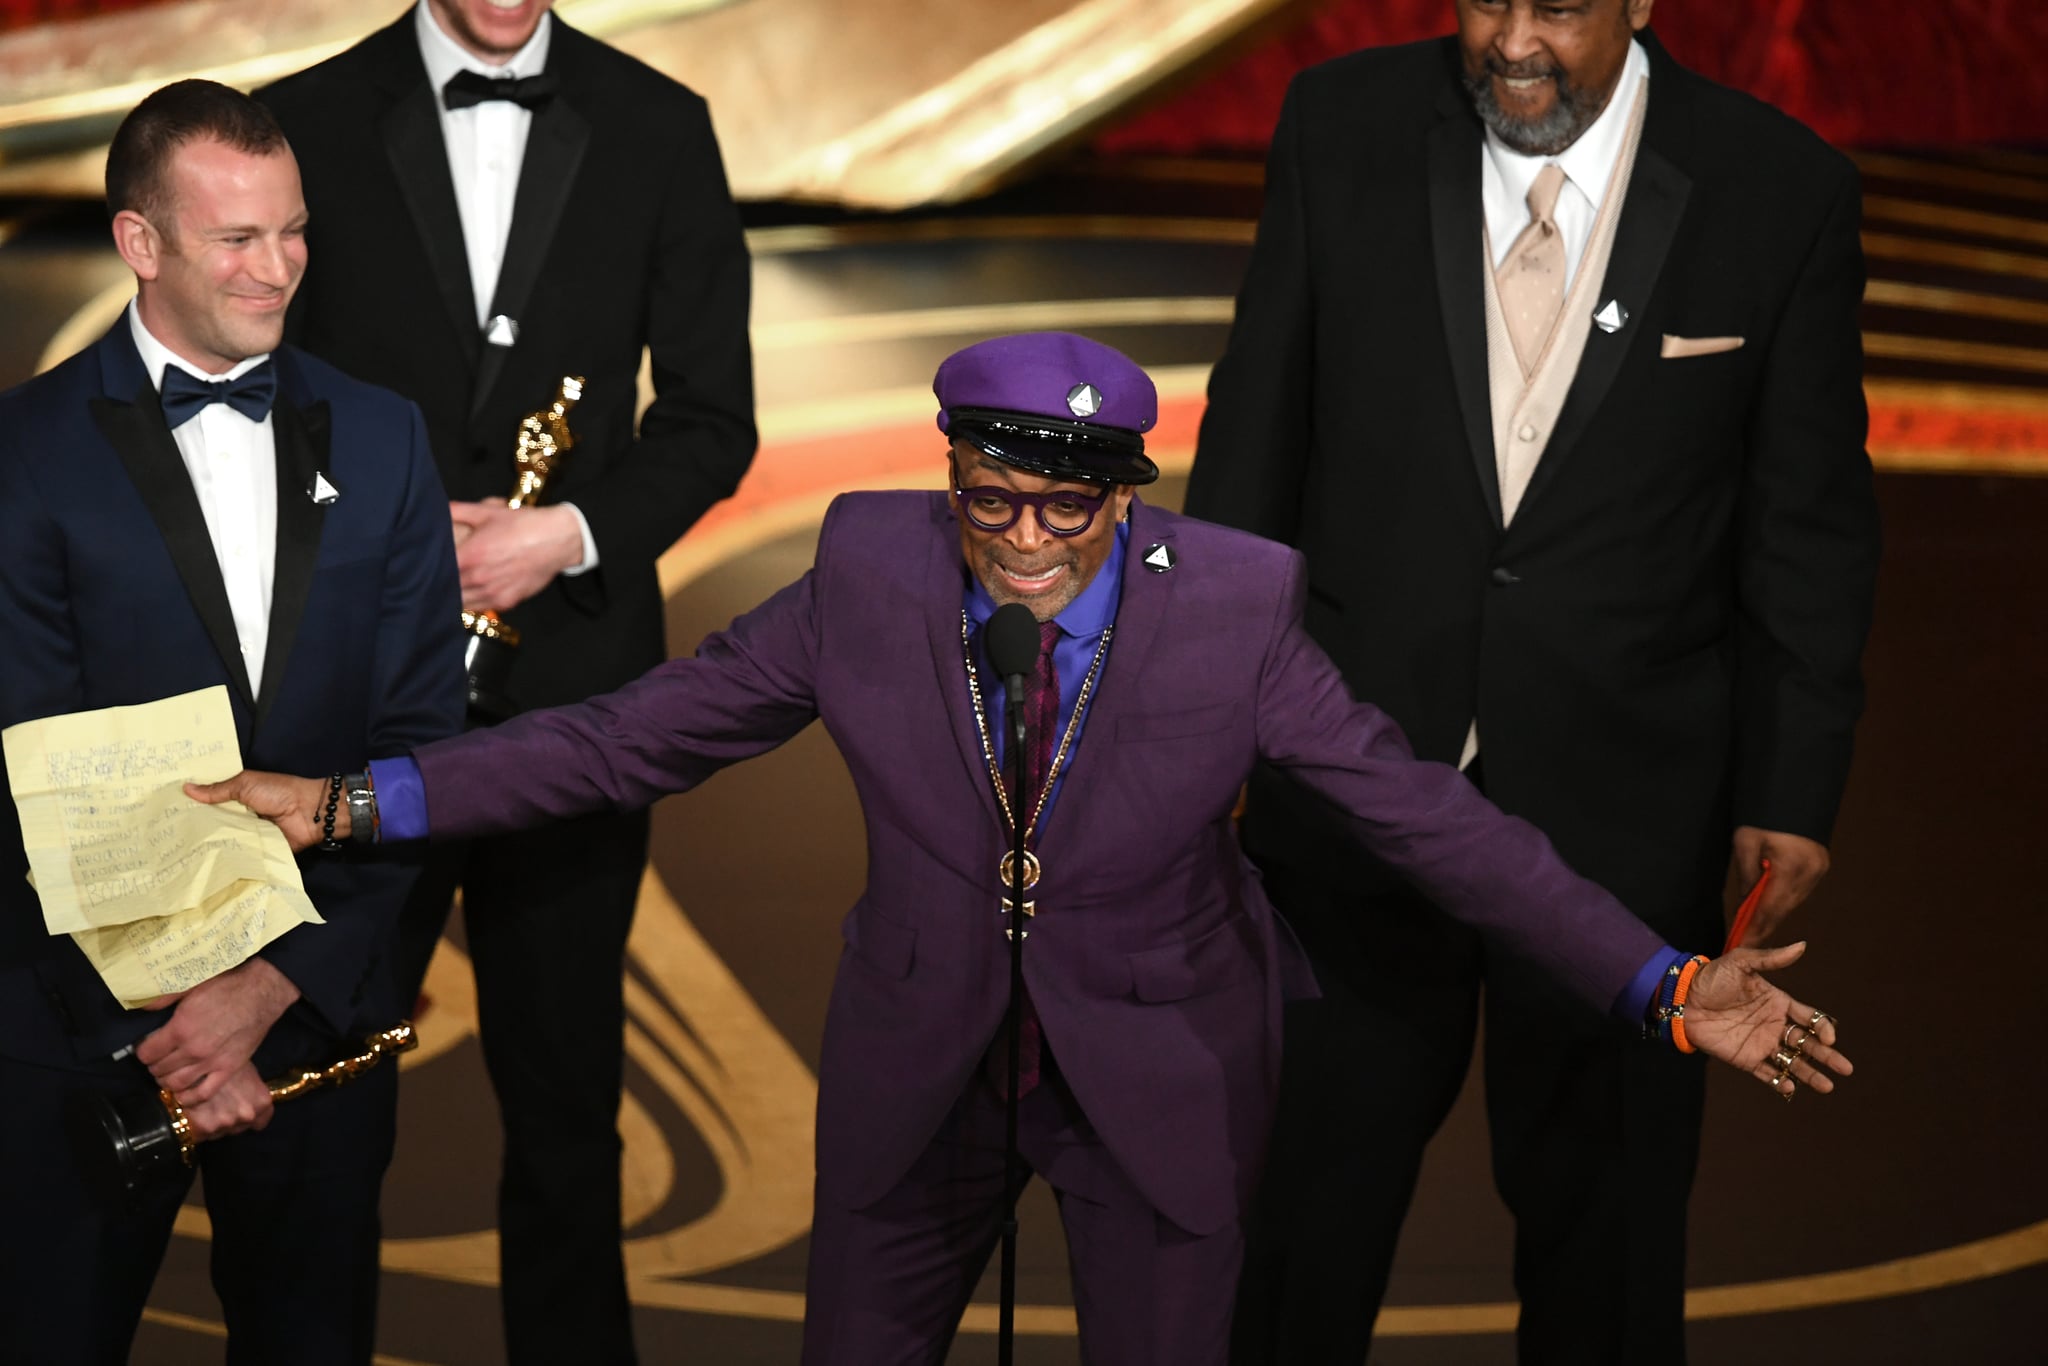 HOLLYWOOD, CALIFORNIA - FEBRUARY 24: Spike Lee accepts the Adapted Screenplay award for 'BlacKkKlansman' onstage during the 91st Annual Academy Awards at Dolby Theatre on February 24, 2019 in Hollywood, California. (Photo by Kevin Winter/Getty Images)